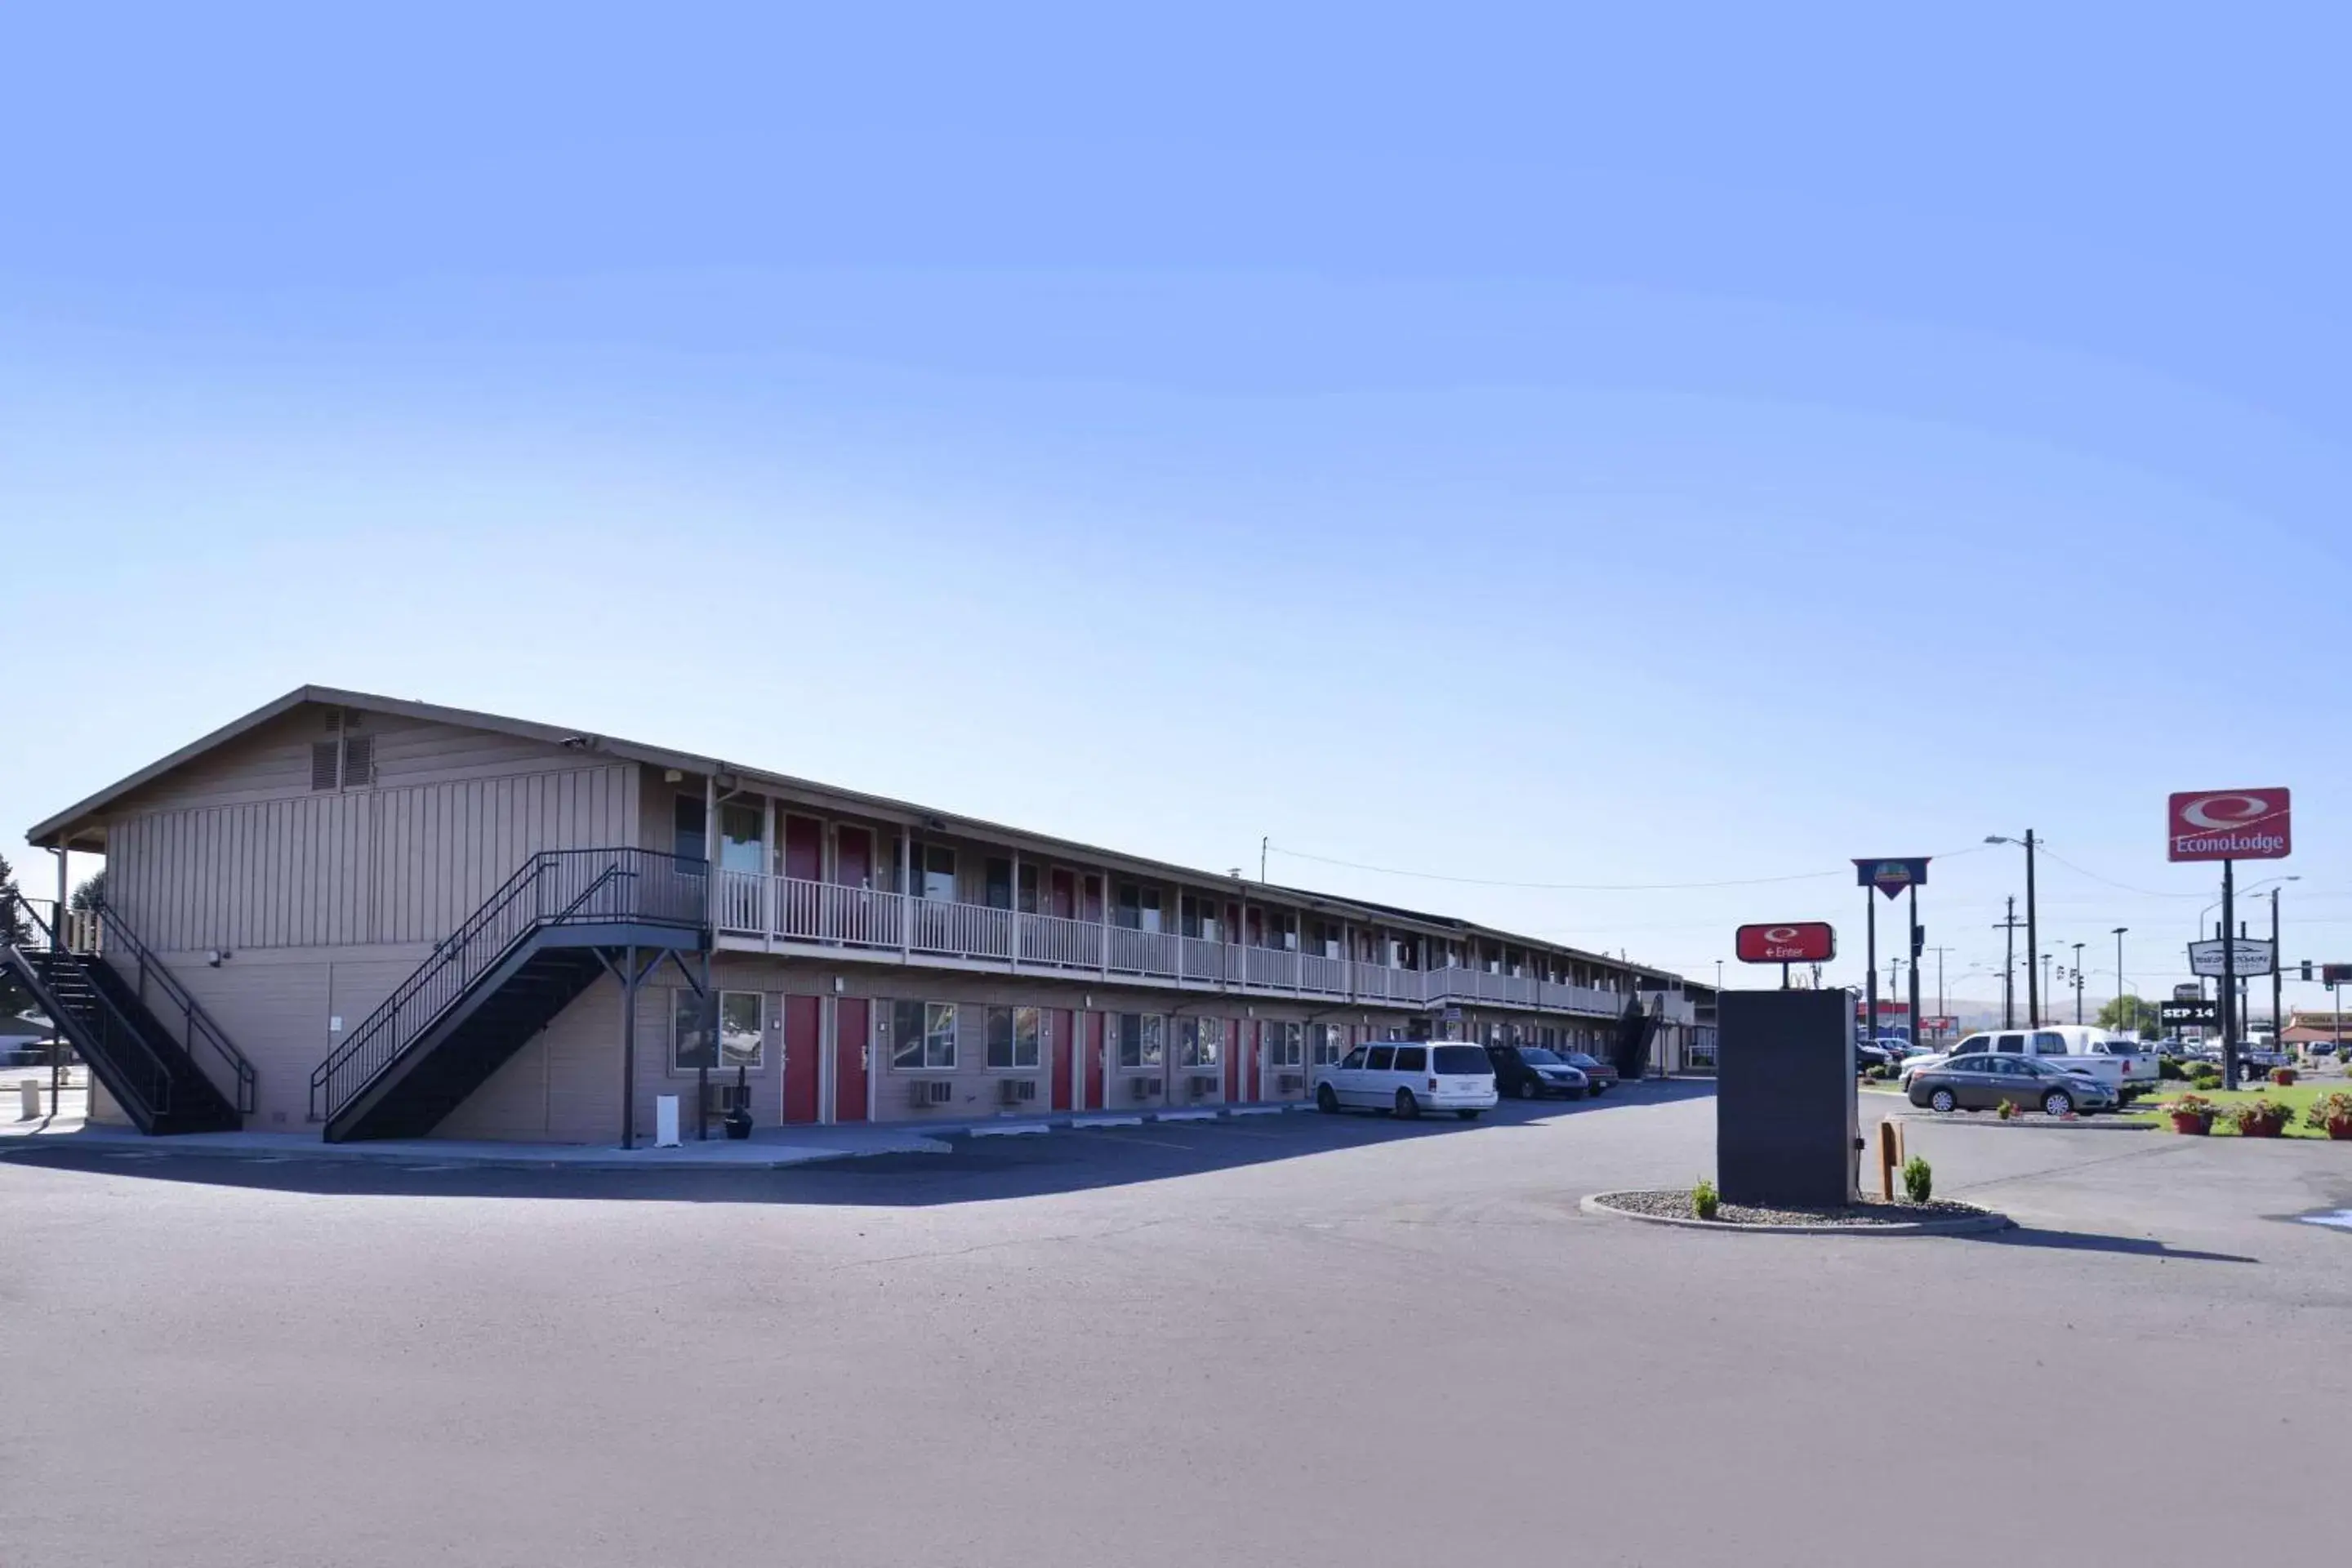 Property Building in Econo Lodge Kennewick